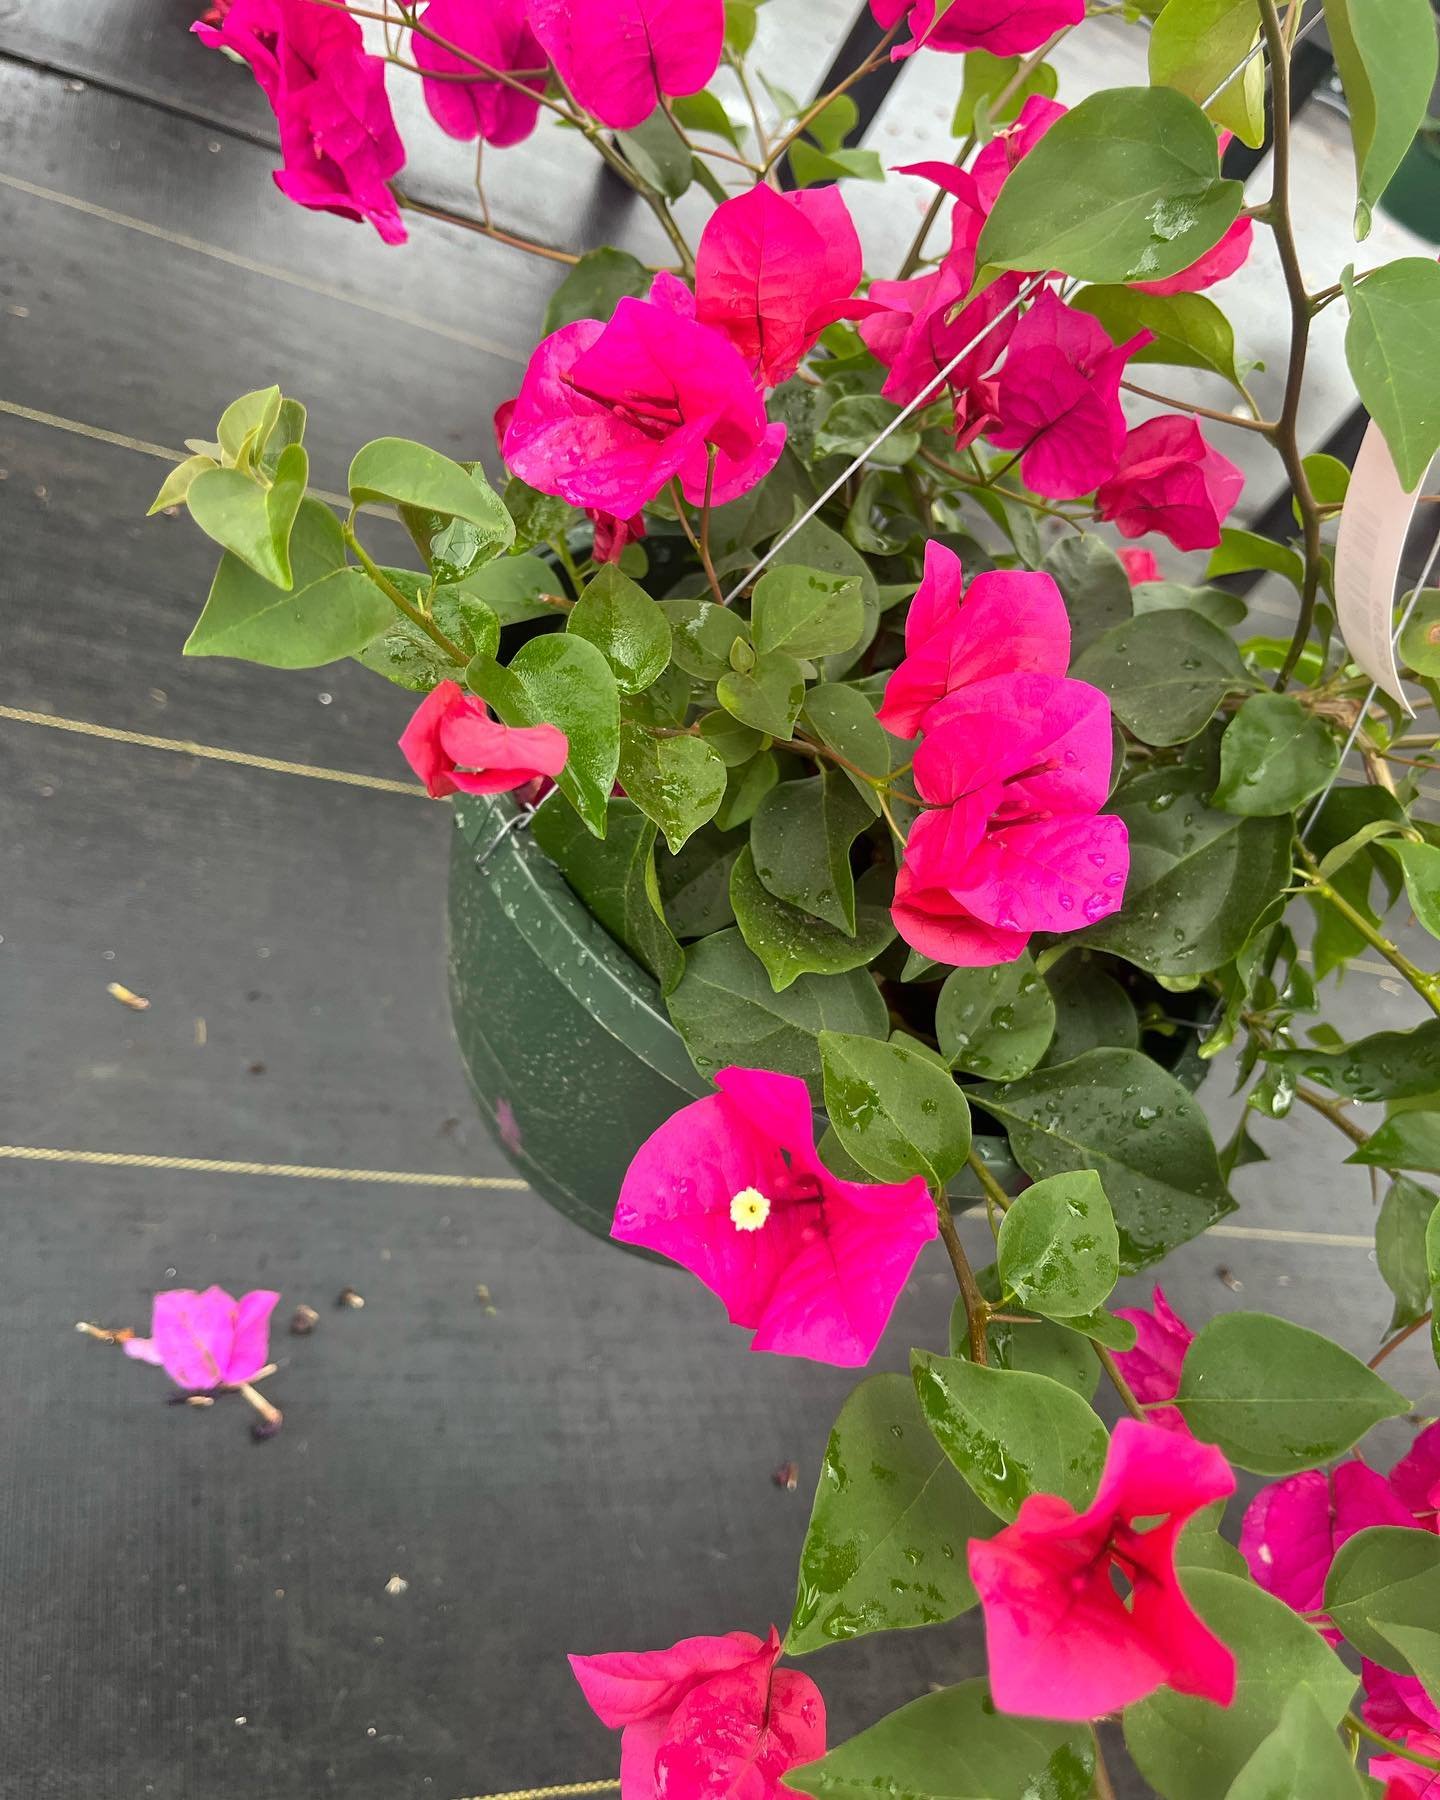 Bougainvillea hanging baskets are a beautiful addition to a sunny spot! They need 5-6 hours of sunlight to thrive. And Hummingbirds love them!! 

We have them in purple and pink!